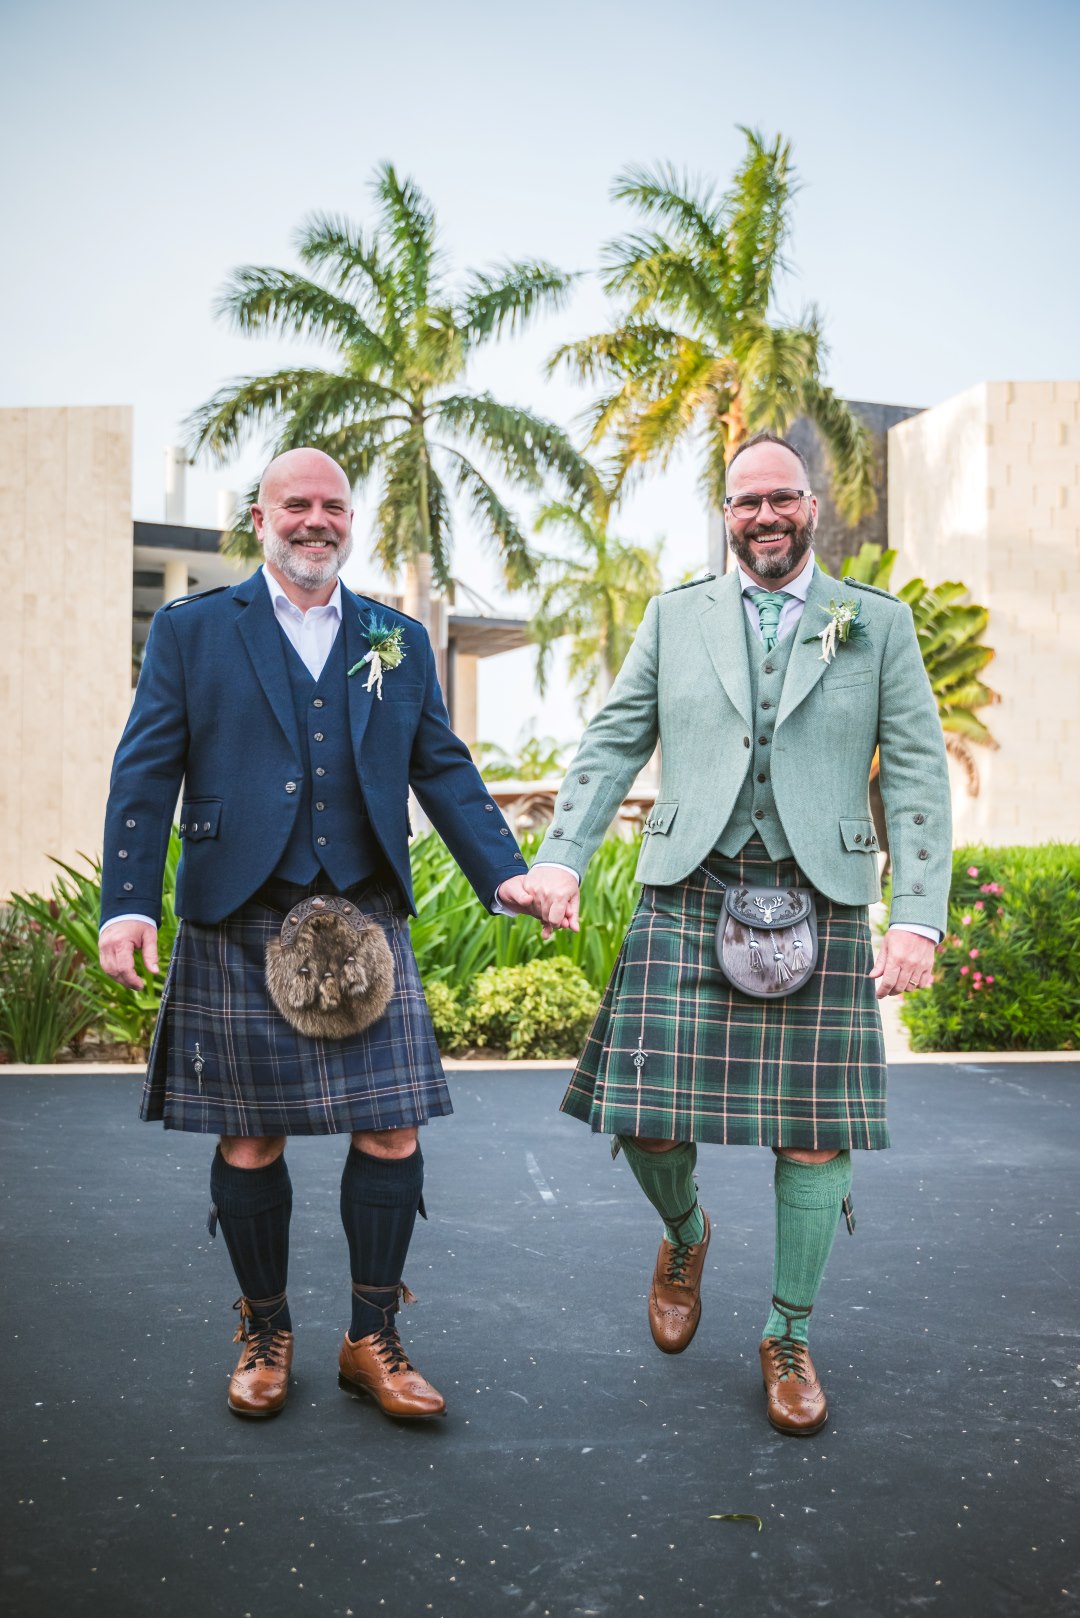 Kilt outfits for grooms